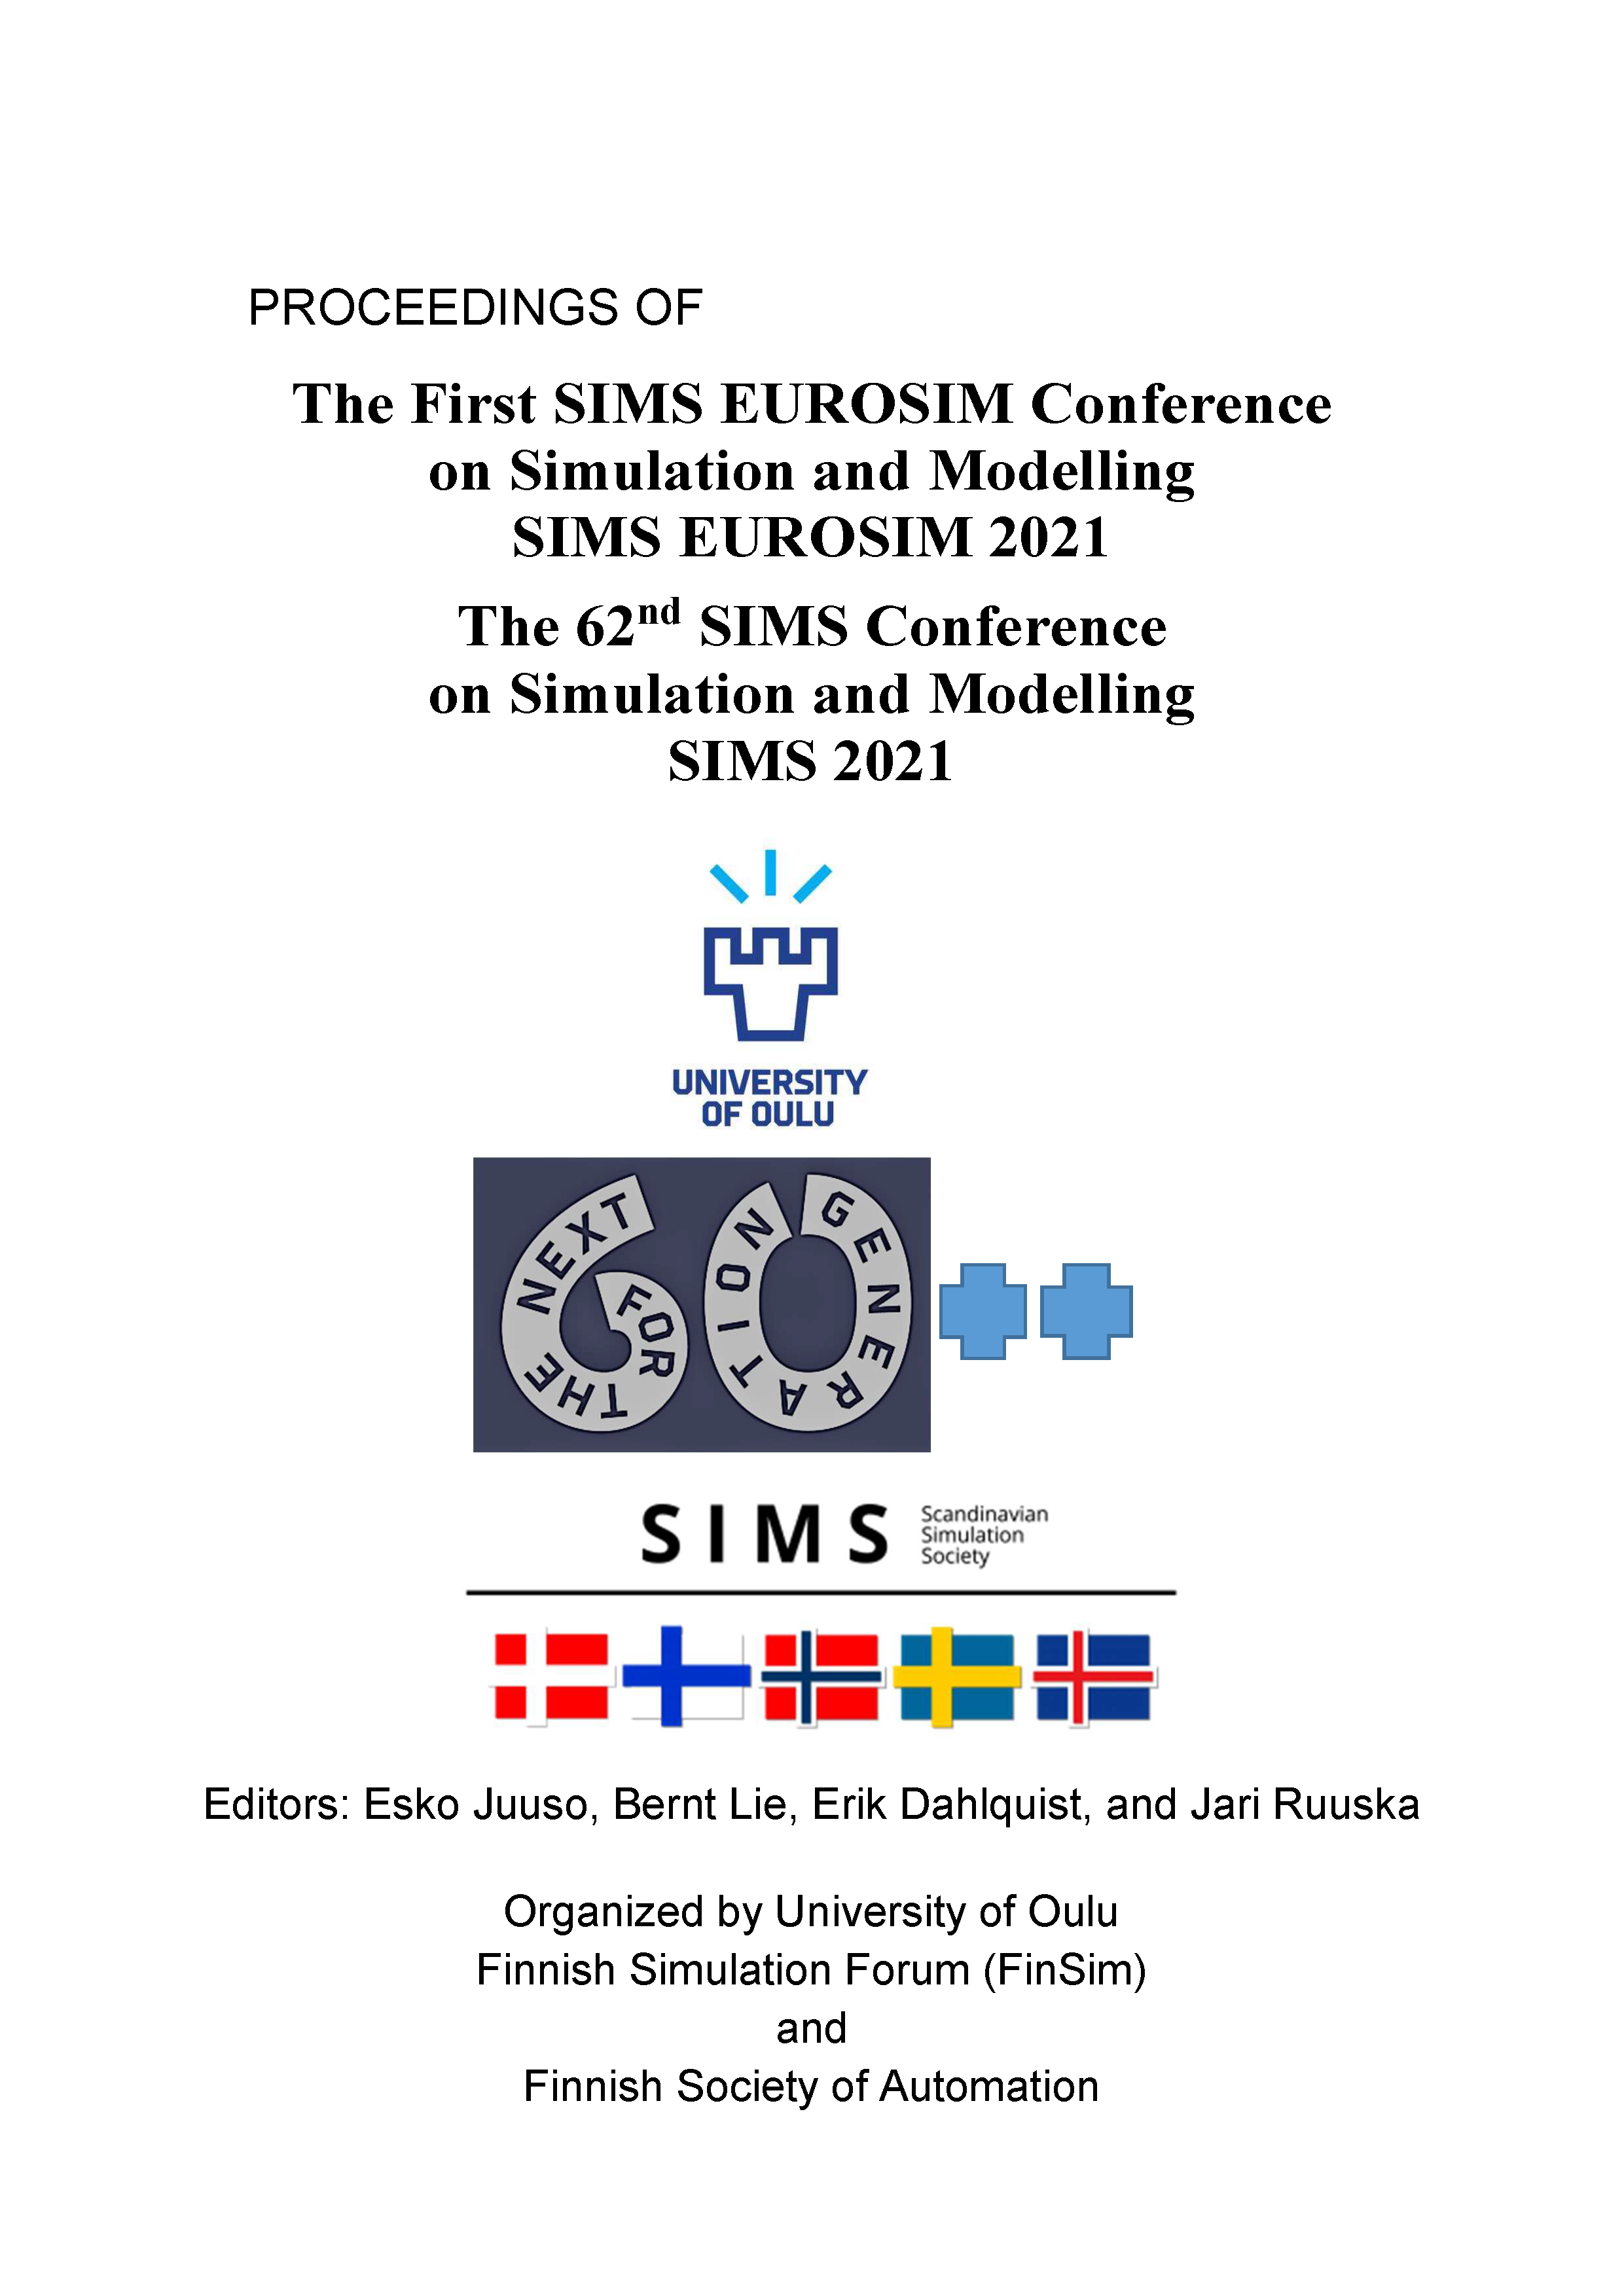 					View The First SIMS EUROSIM Conference on Modelling and Simulation, SIMS EUROSIM 2021, and 62nd International Conference of Scandinavian Simulation Society, SIMS 2021, September 21-23, Virtual Conference, Finland
				